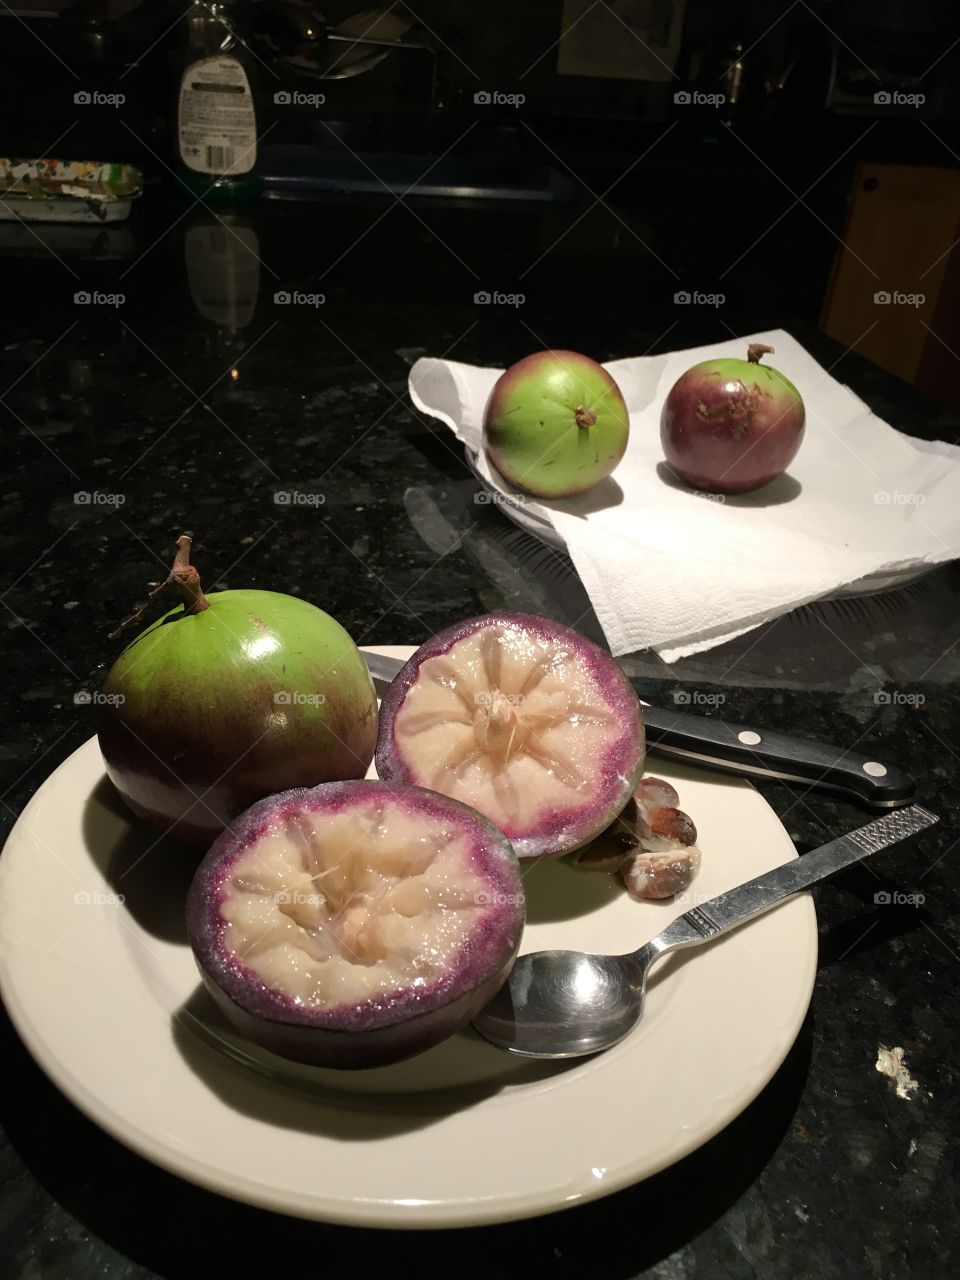 Caimitos--exotic tropical fruit. Purple and green on the outside and a translucent, sweet, milky pulp inside. 